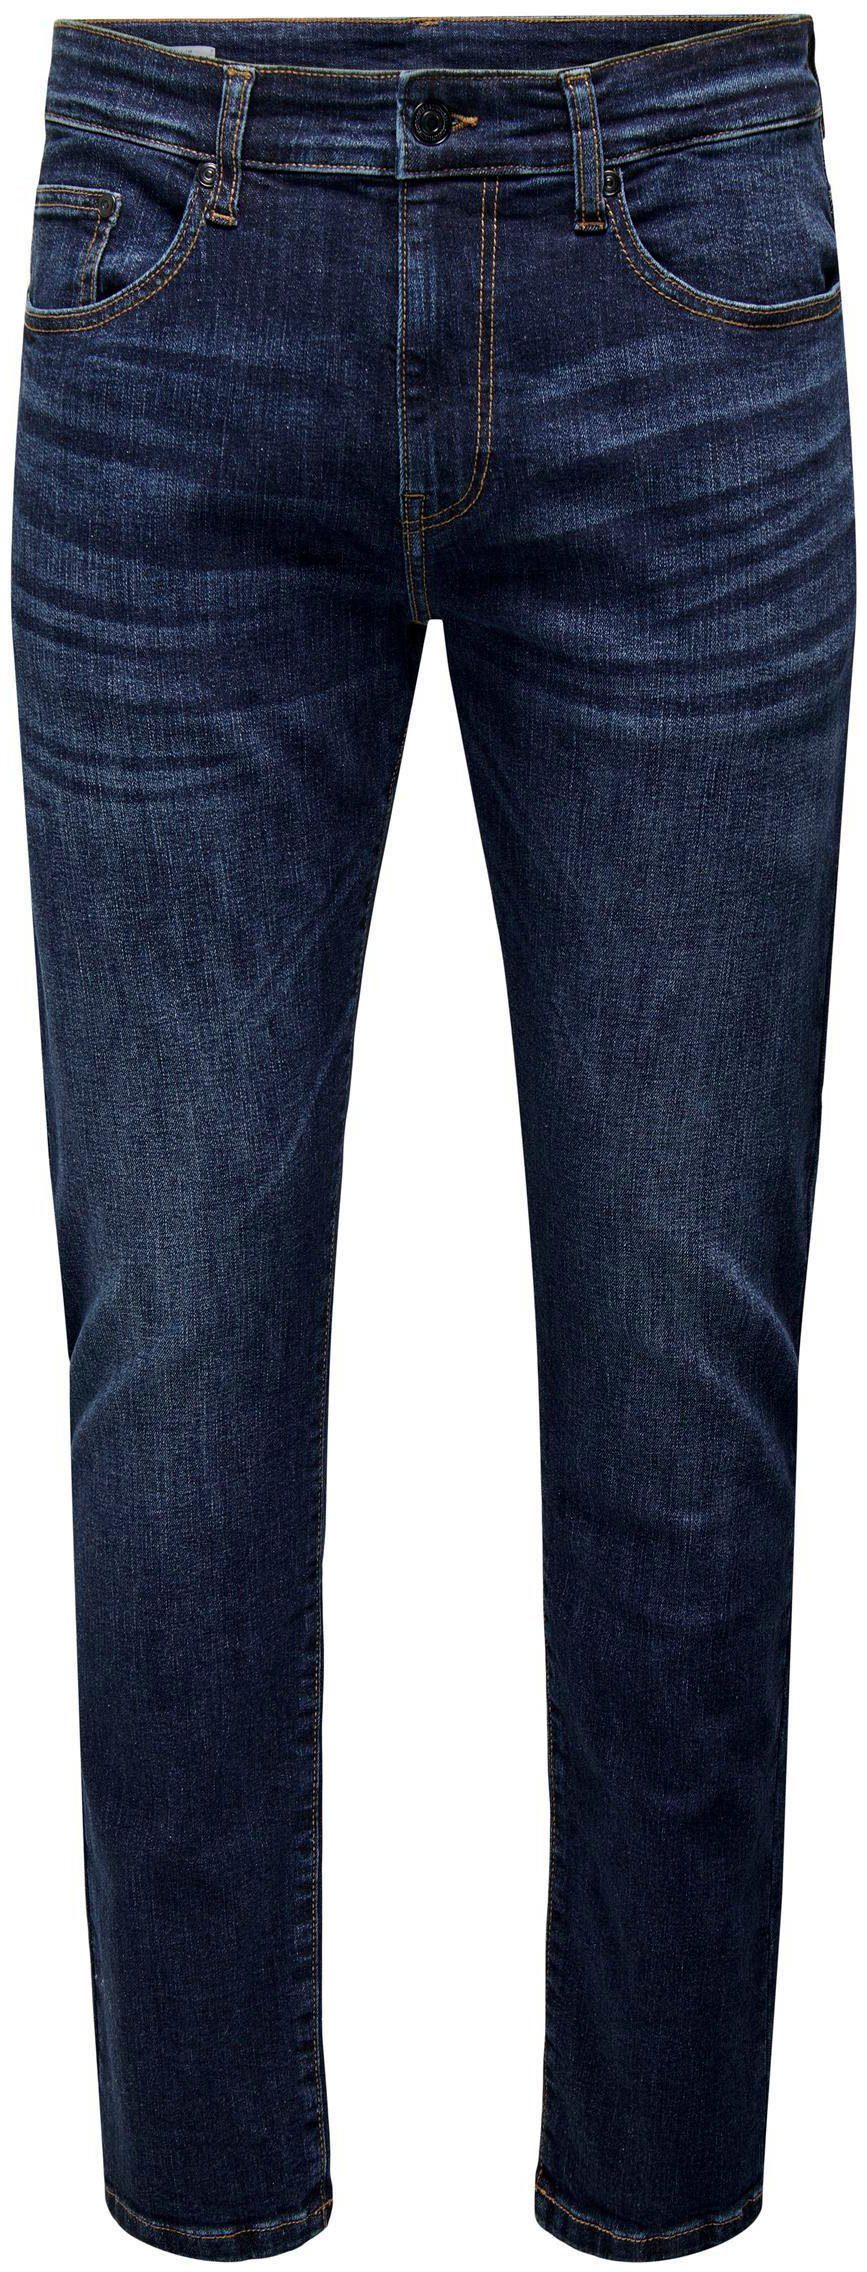 DNM 6752 ONLY & BLUE JEANS SONS Straight-Jeans NOOS ONSWEFT REG.DK.